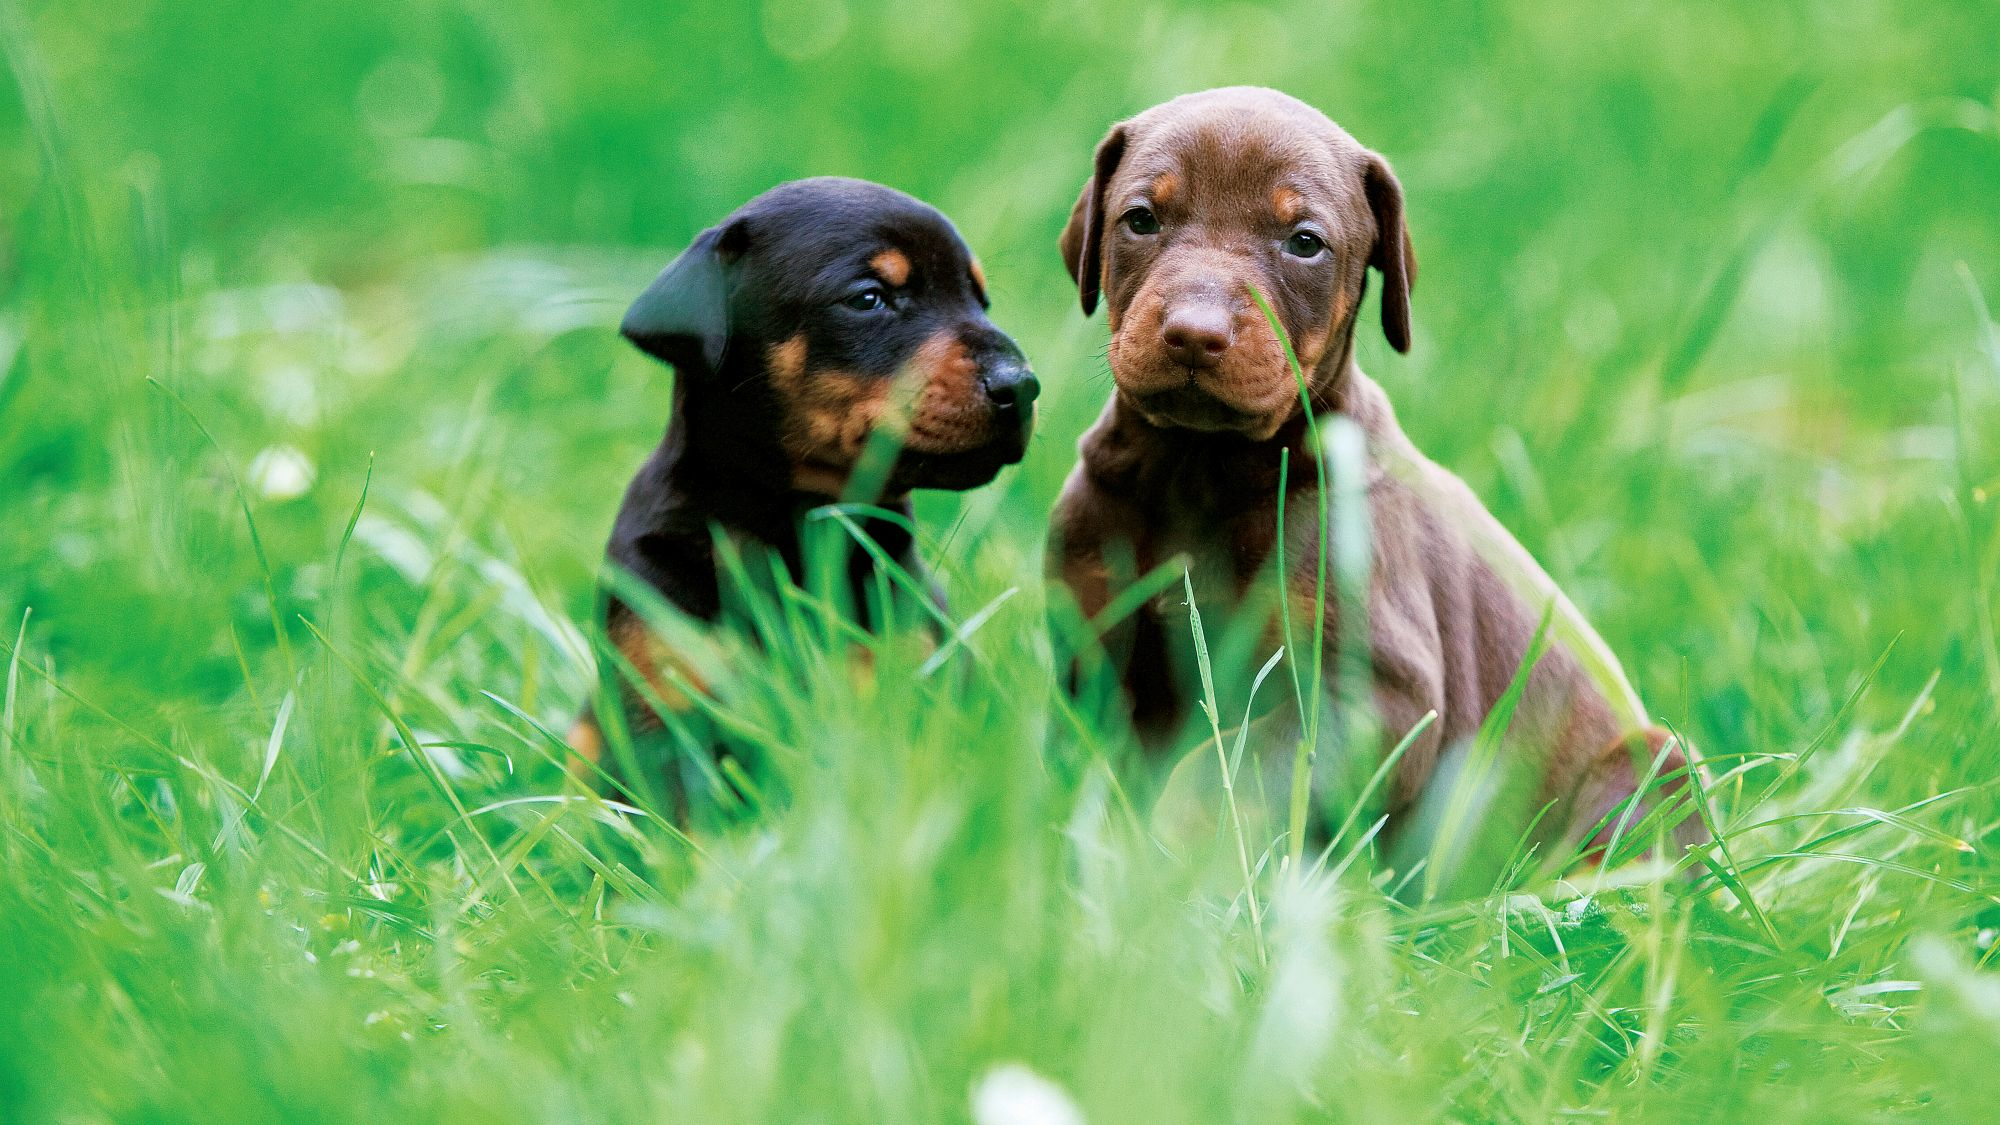 A brown and a black Doberman puppy sitting next to each other in grass